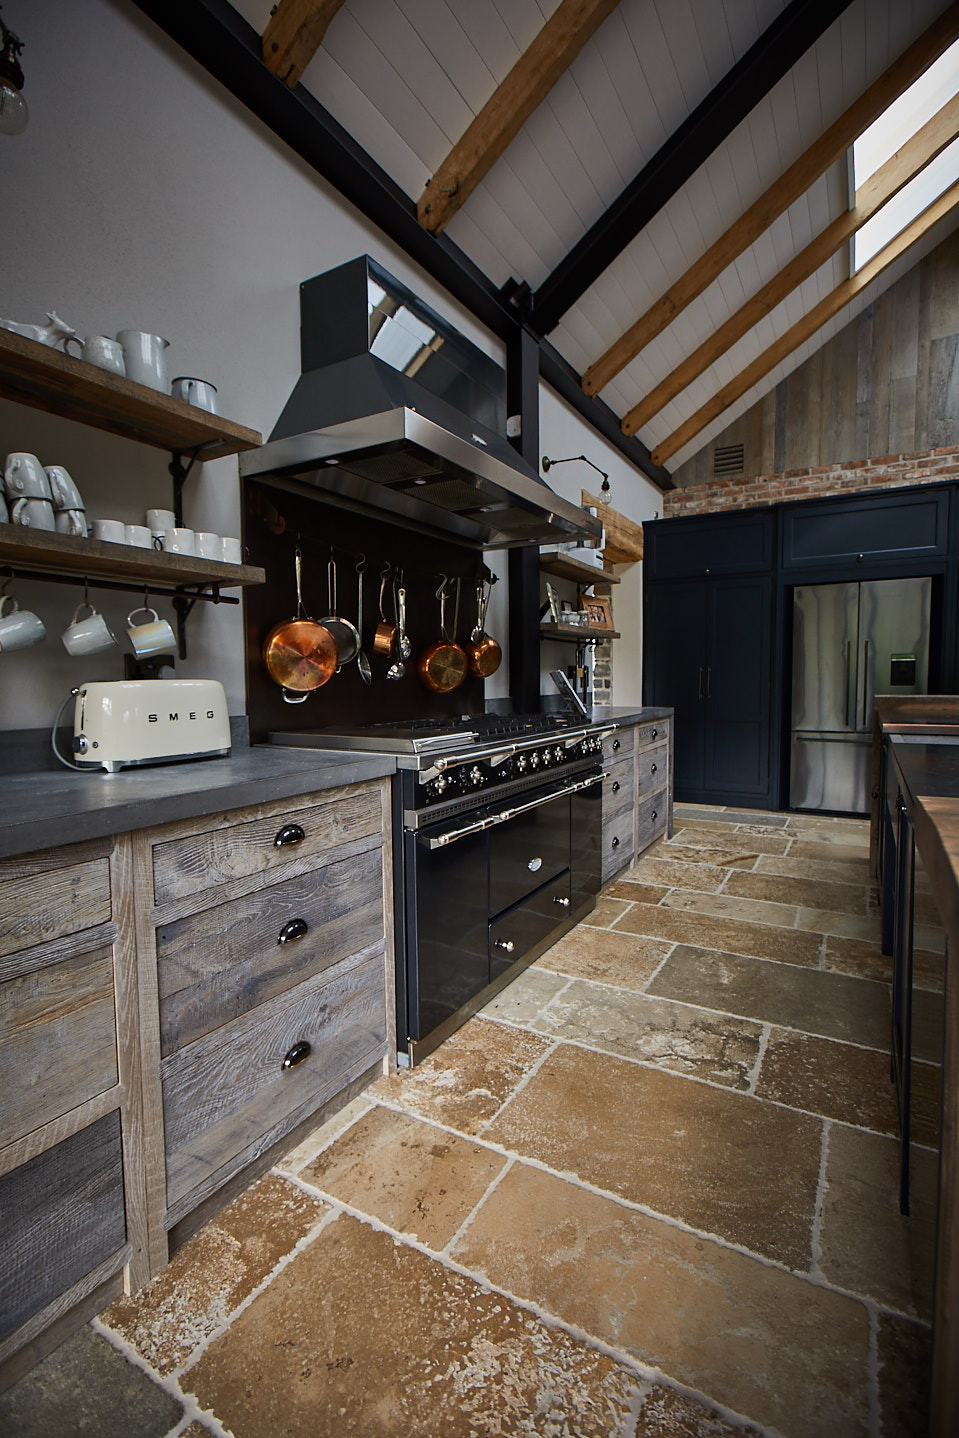 Black range cooker with matching hood next to rustic oak pan drawers and rustic open shelves